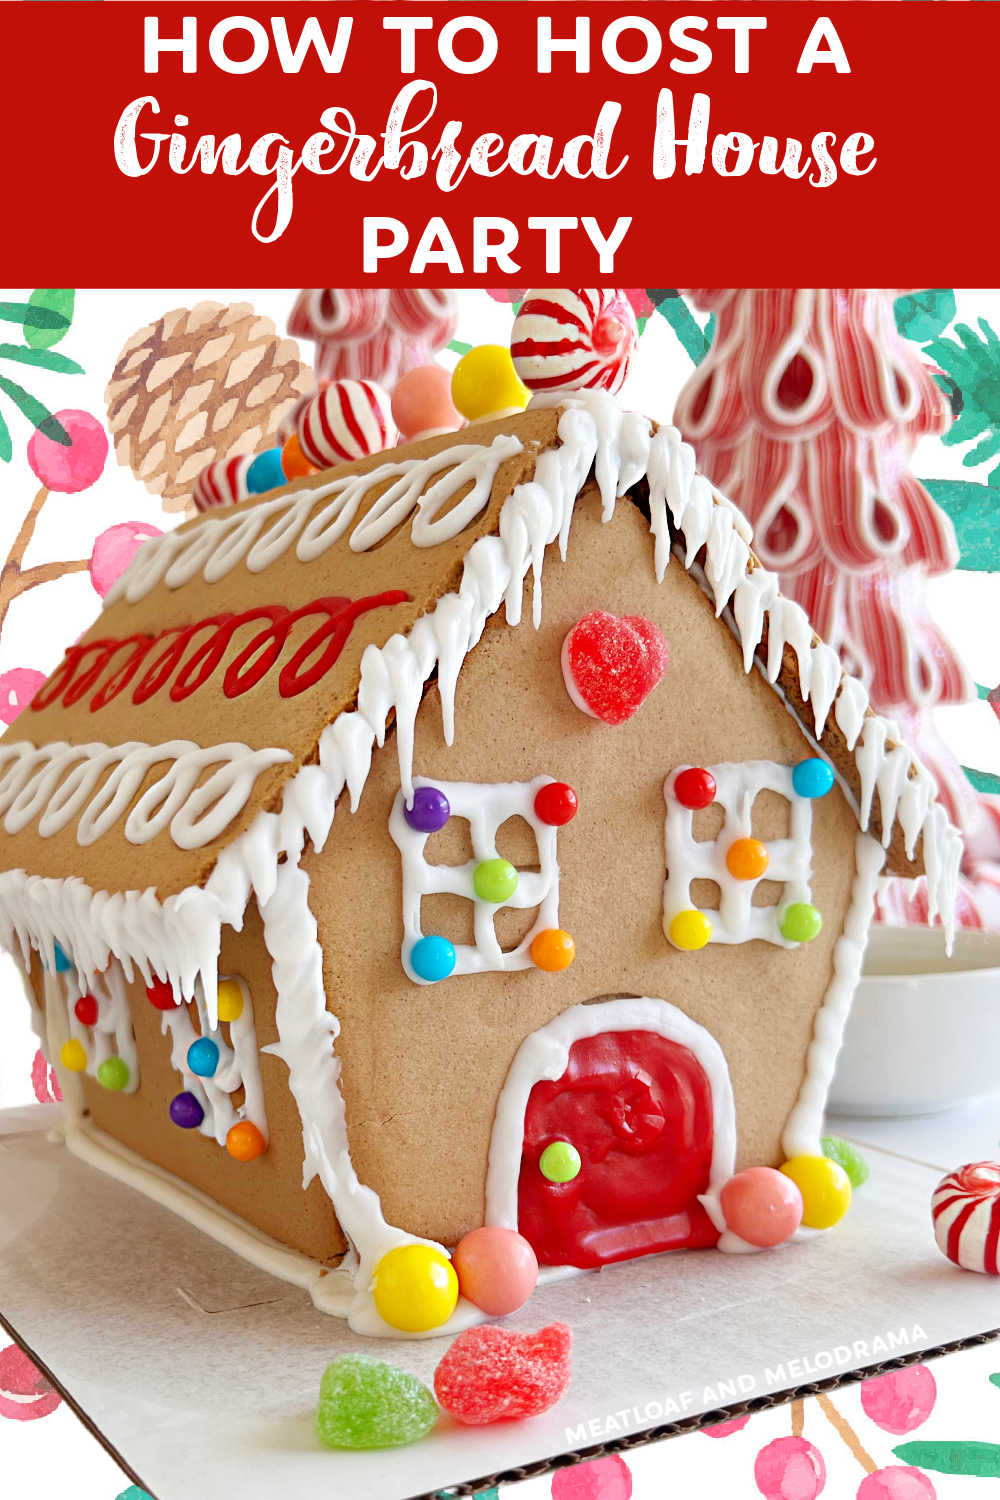 Learn how to host a gingerbread house party the easy way! Get tips for decorating, candy, invitations, food and the best gingerbread houses to buy. A gingerbread house decorating party is perfect for the holiday season! via @meamel